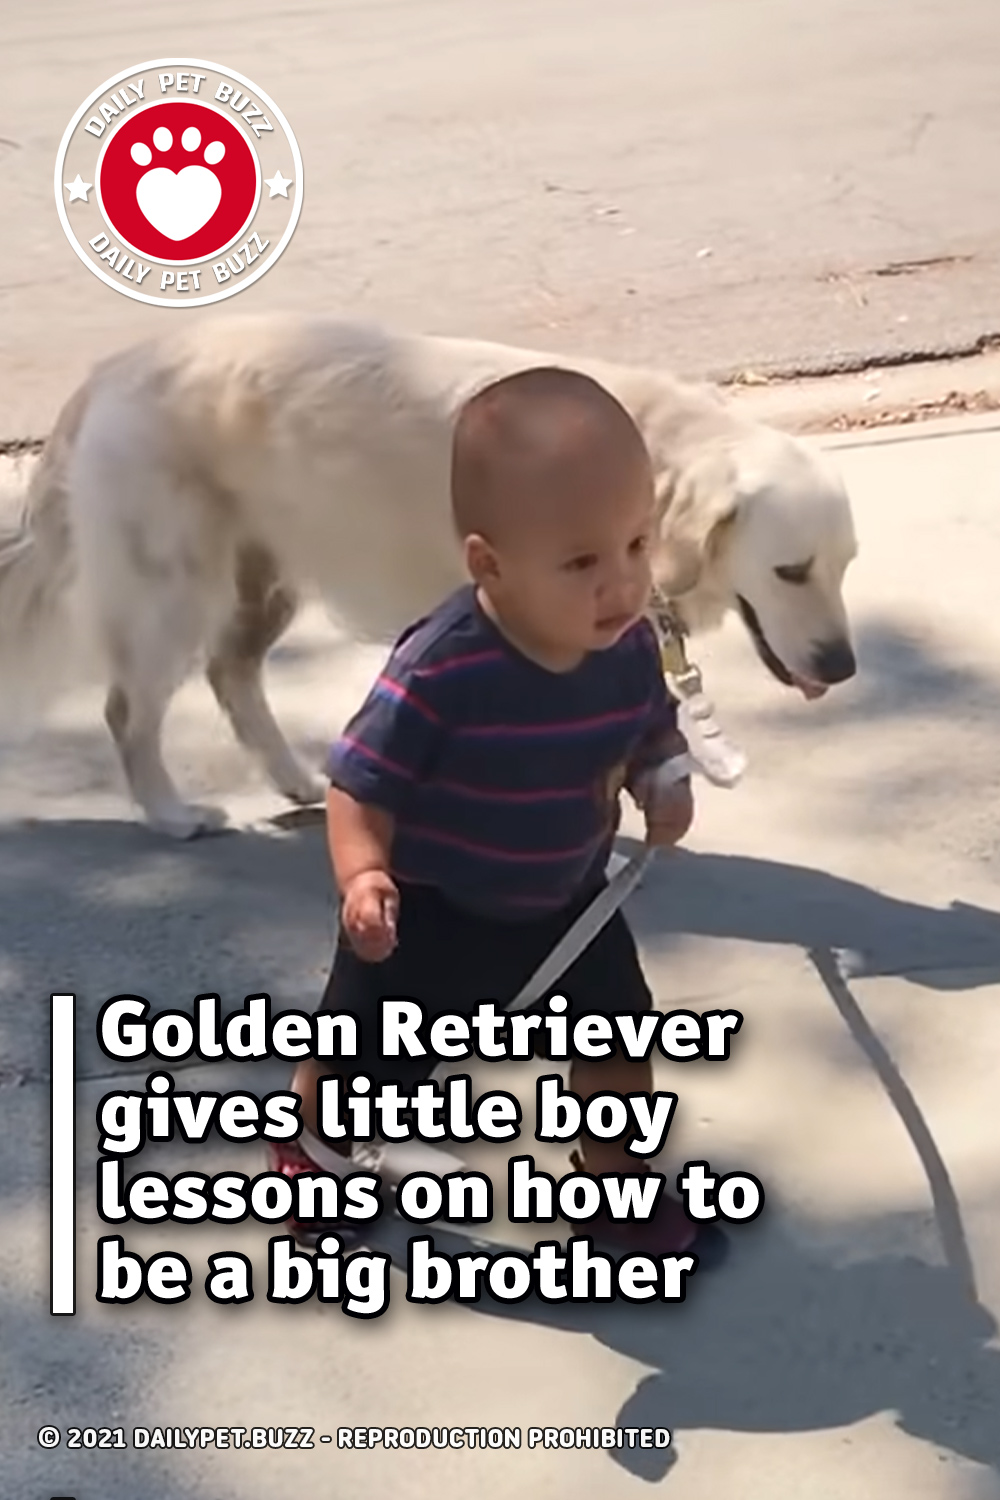 Golden Retriever gives little boy lessons on how to be a big brother